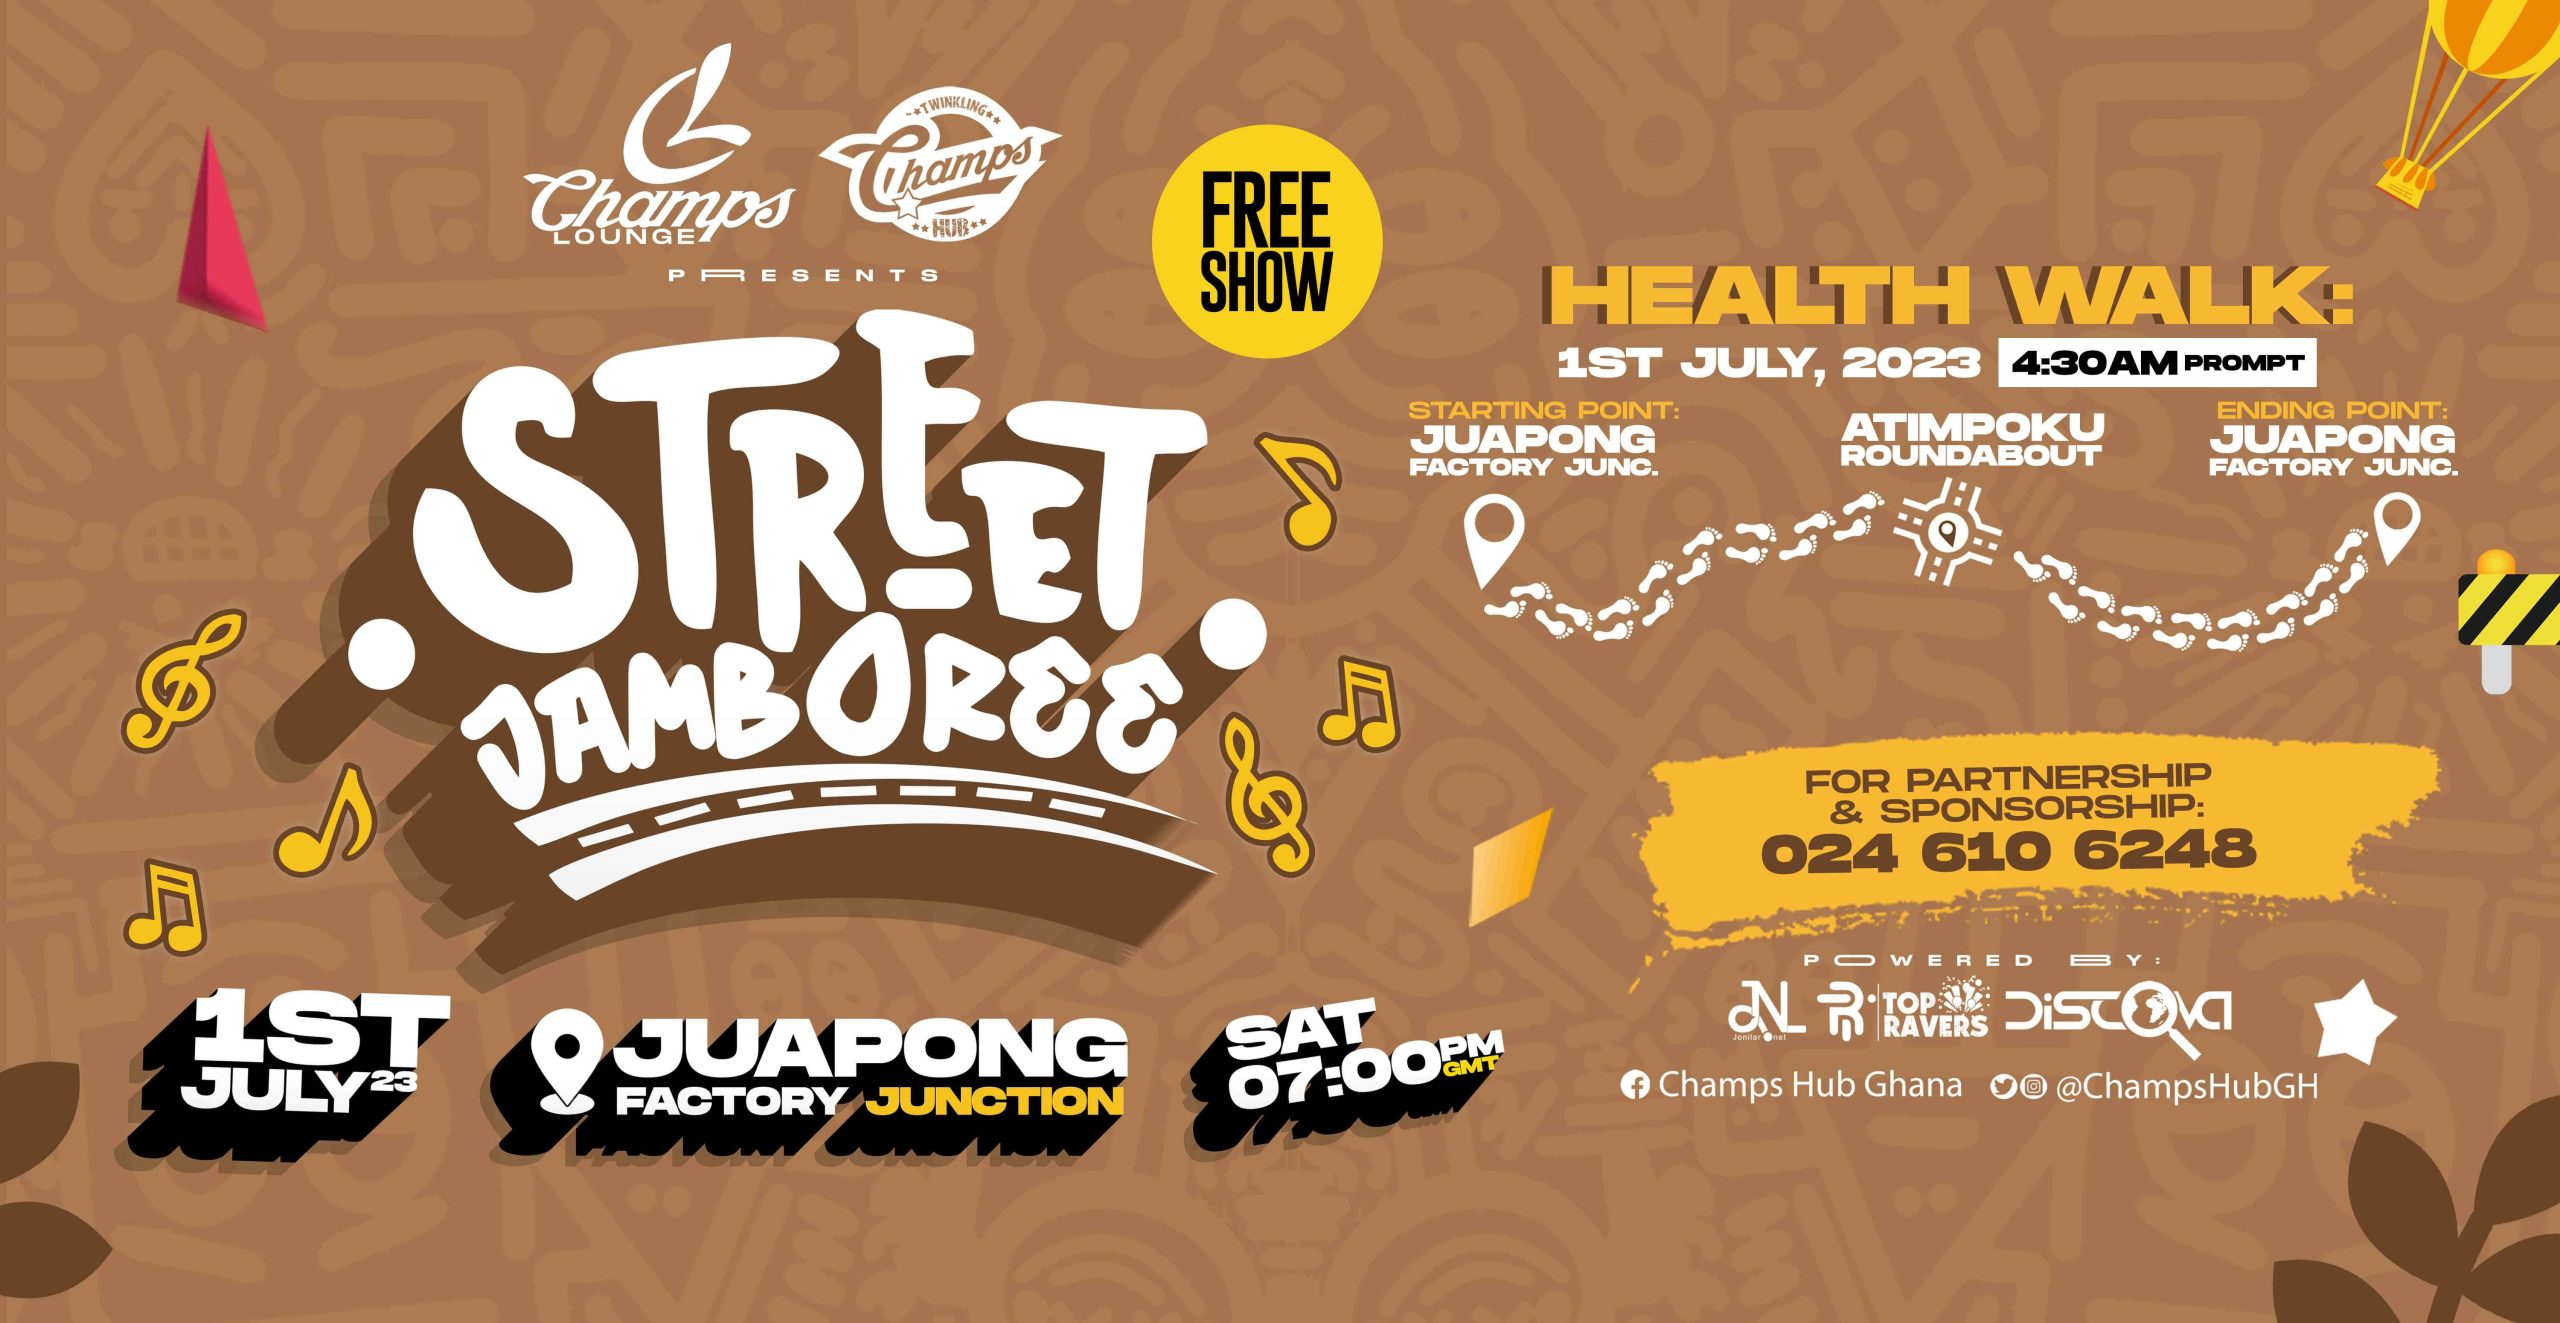 Street Jamboree: Ghana's Biggest Street Carnival Comes to Juapong on 1st July,2023.